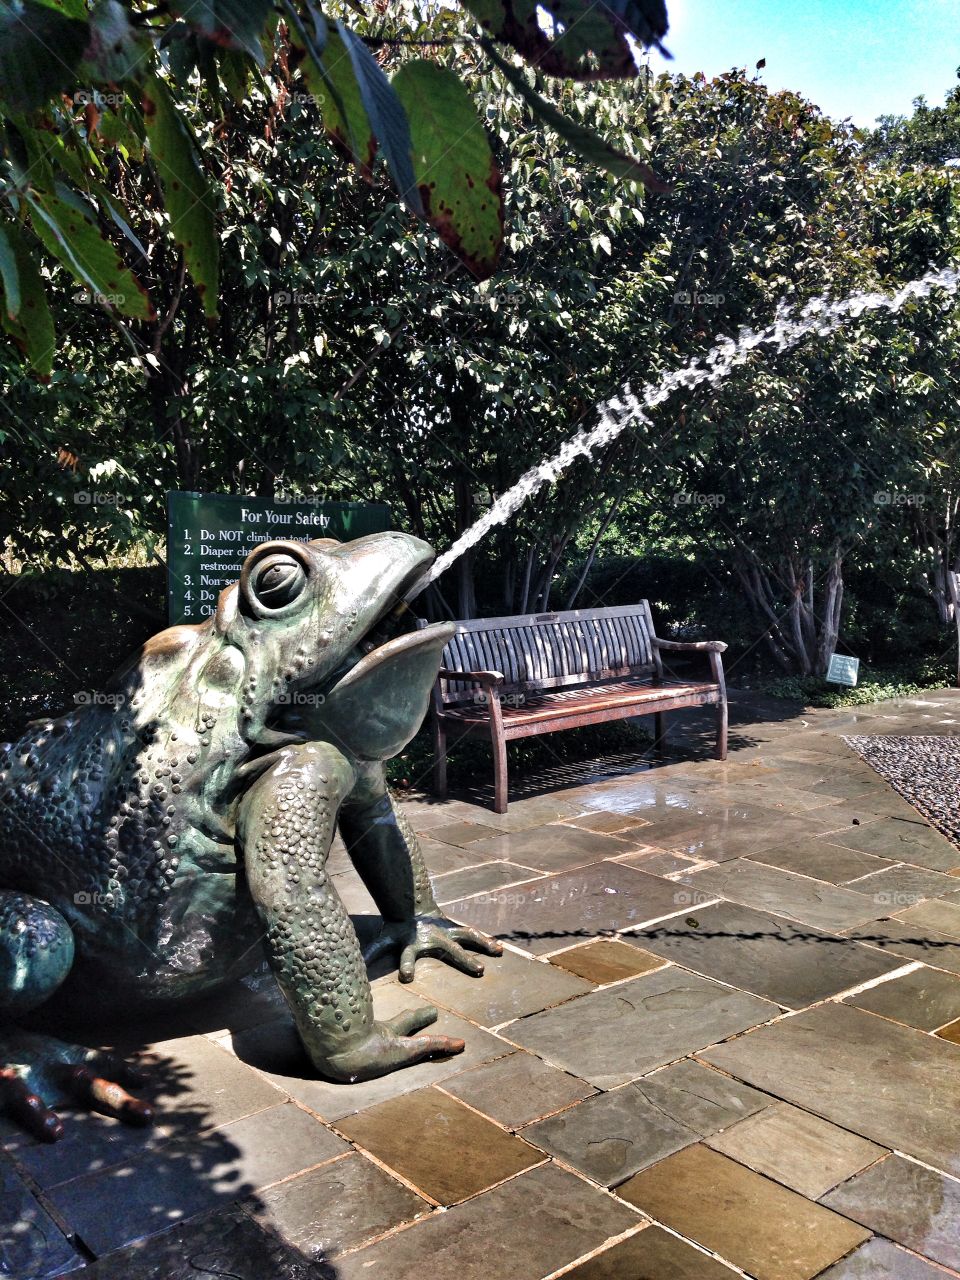 A place to stay cool. Frog water fountain